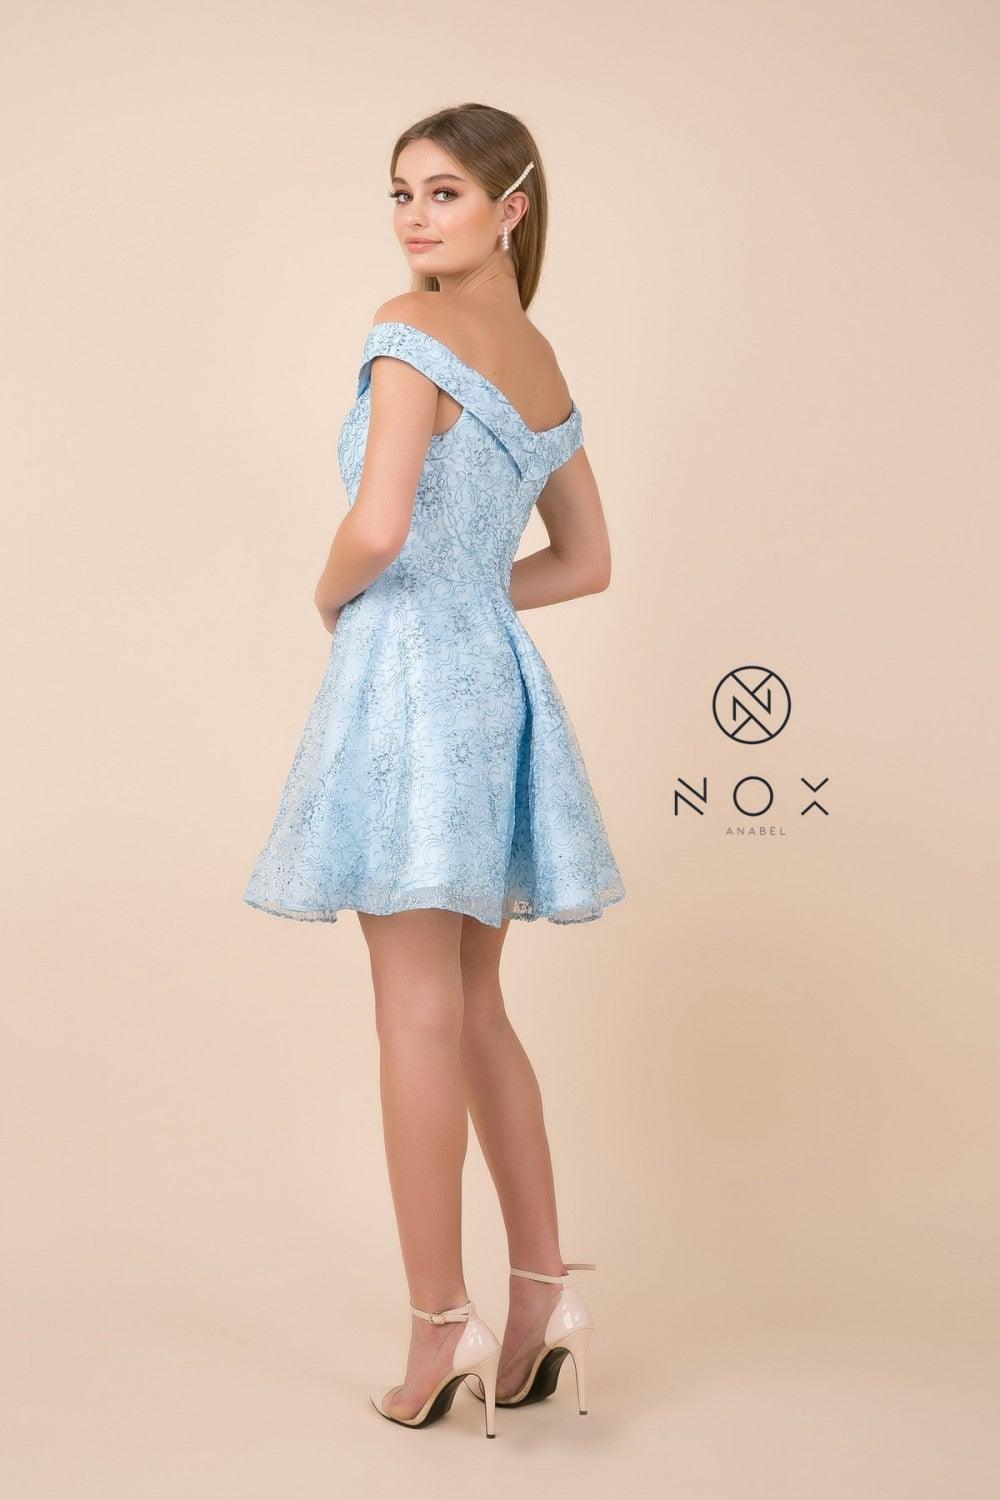 Formal Short Dress Homecoming - The Dress Outlet Nox Anabel